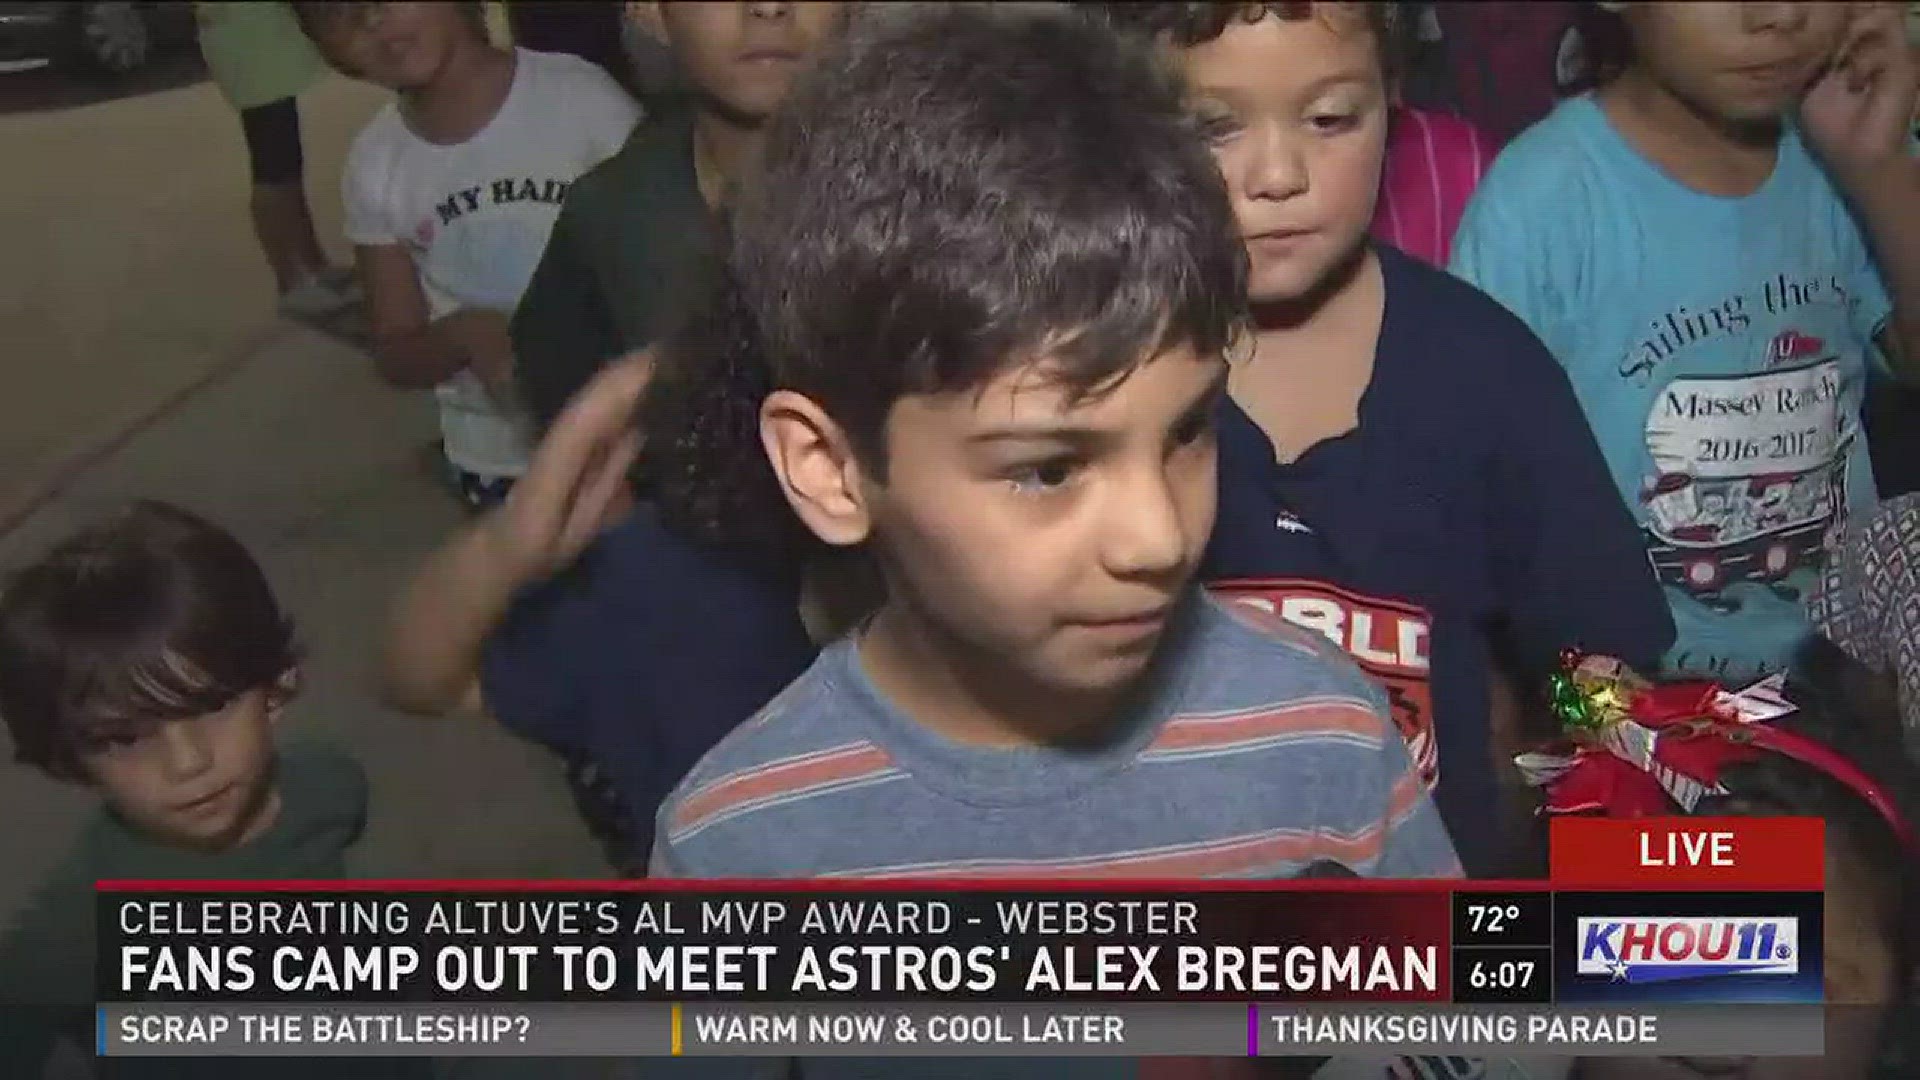 Fans have been waiting outside since Thursday morning to meet Alex Bregman at Academy.